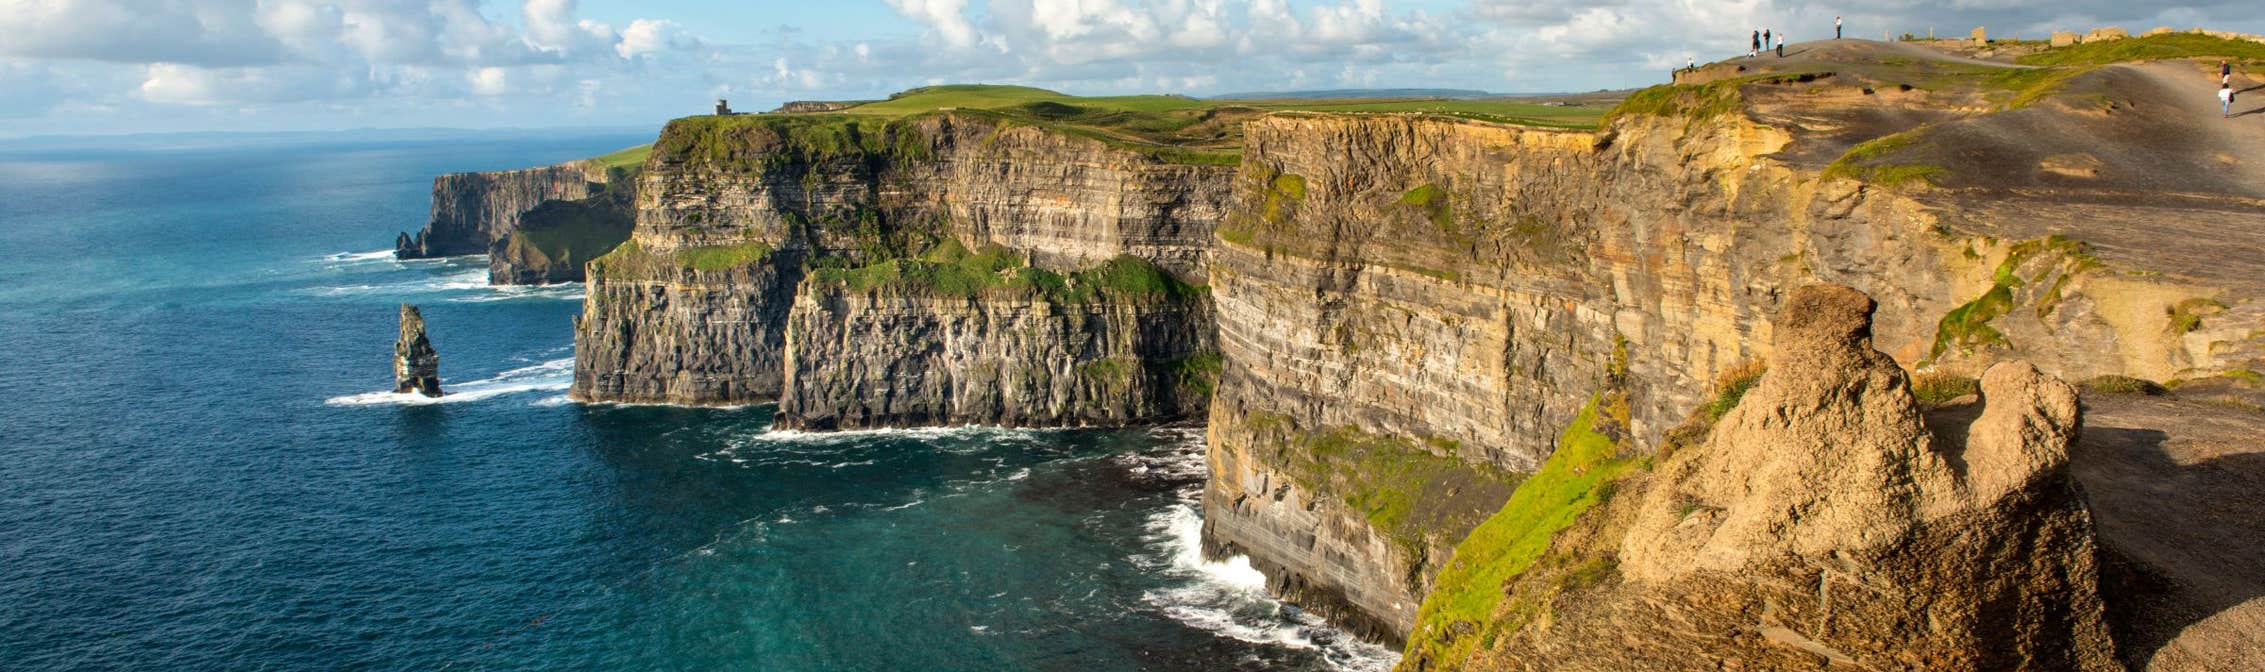 A view out over the stunning Cliffs of Moher, Clare